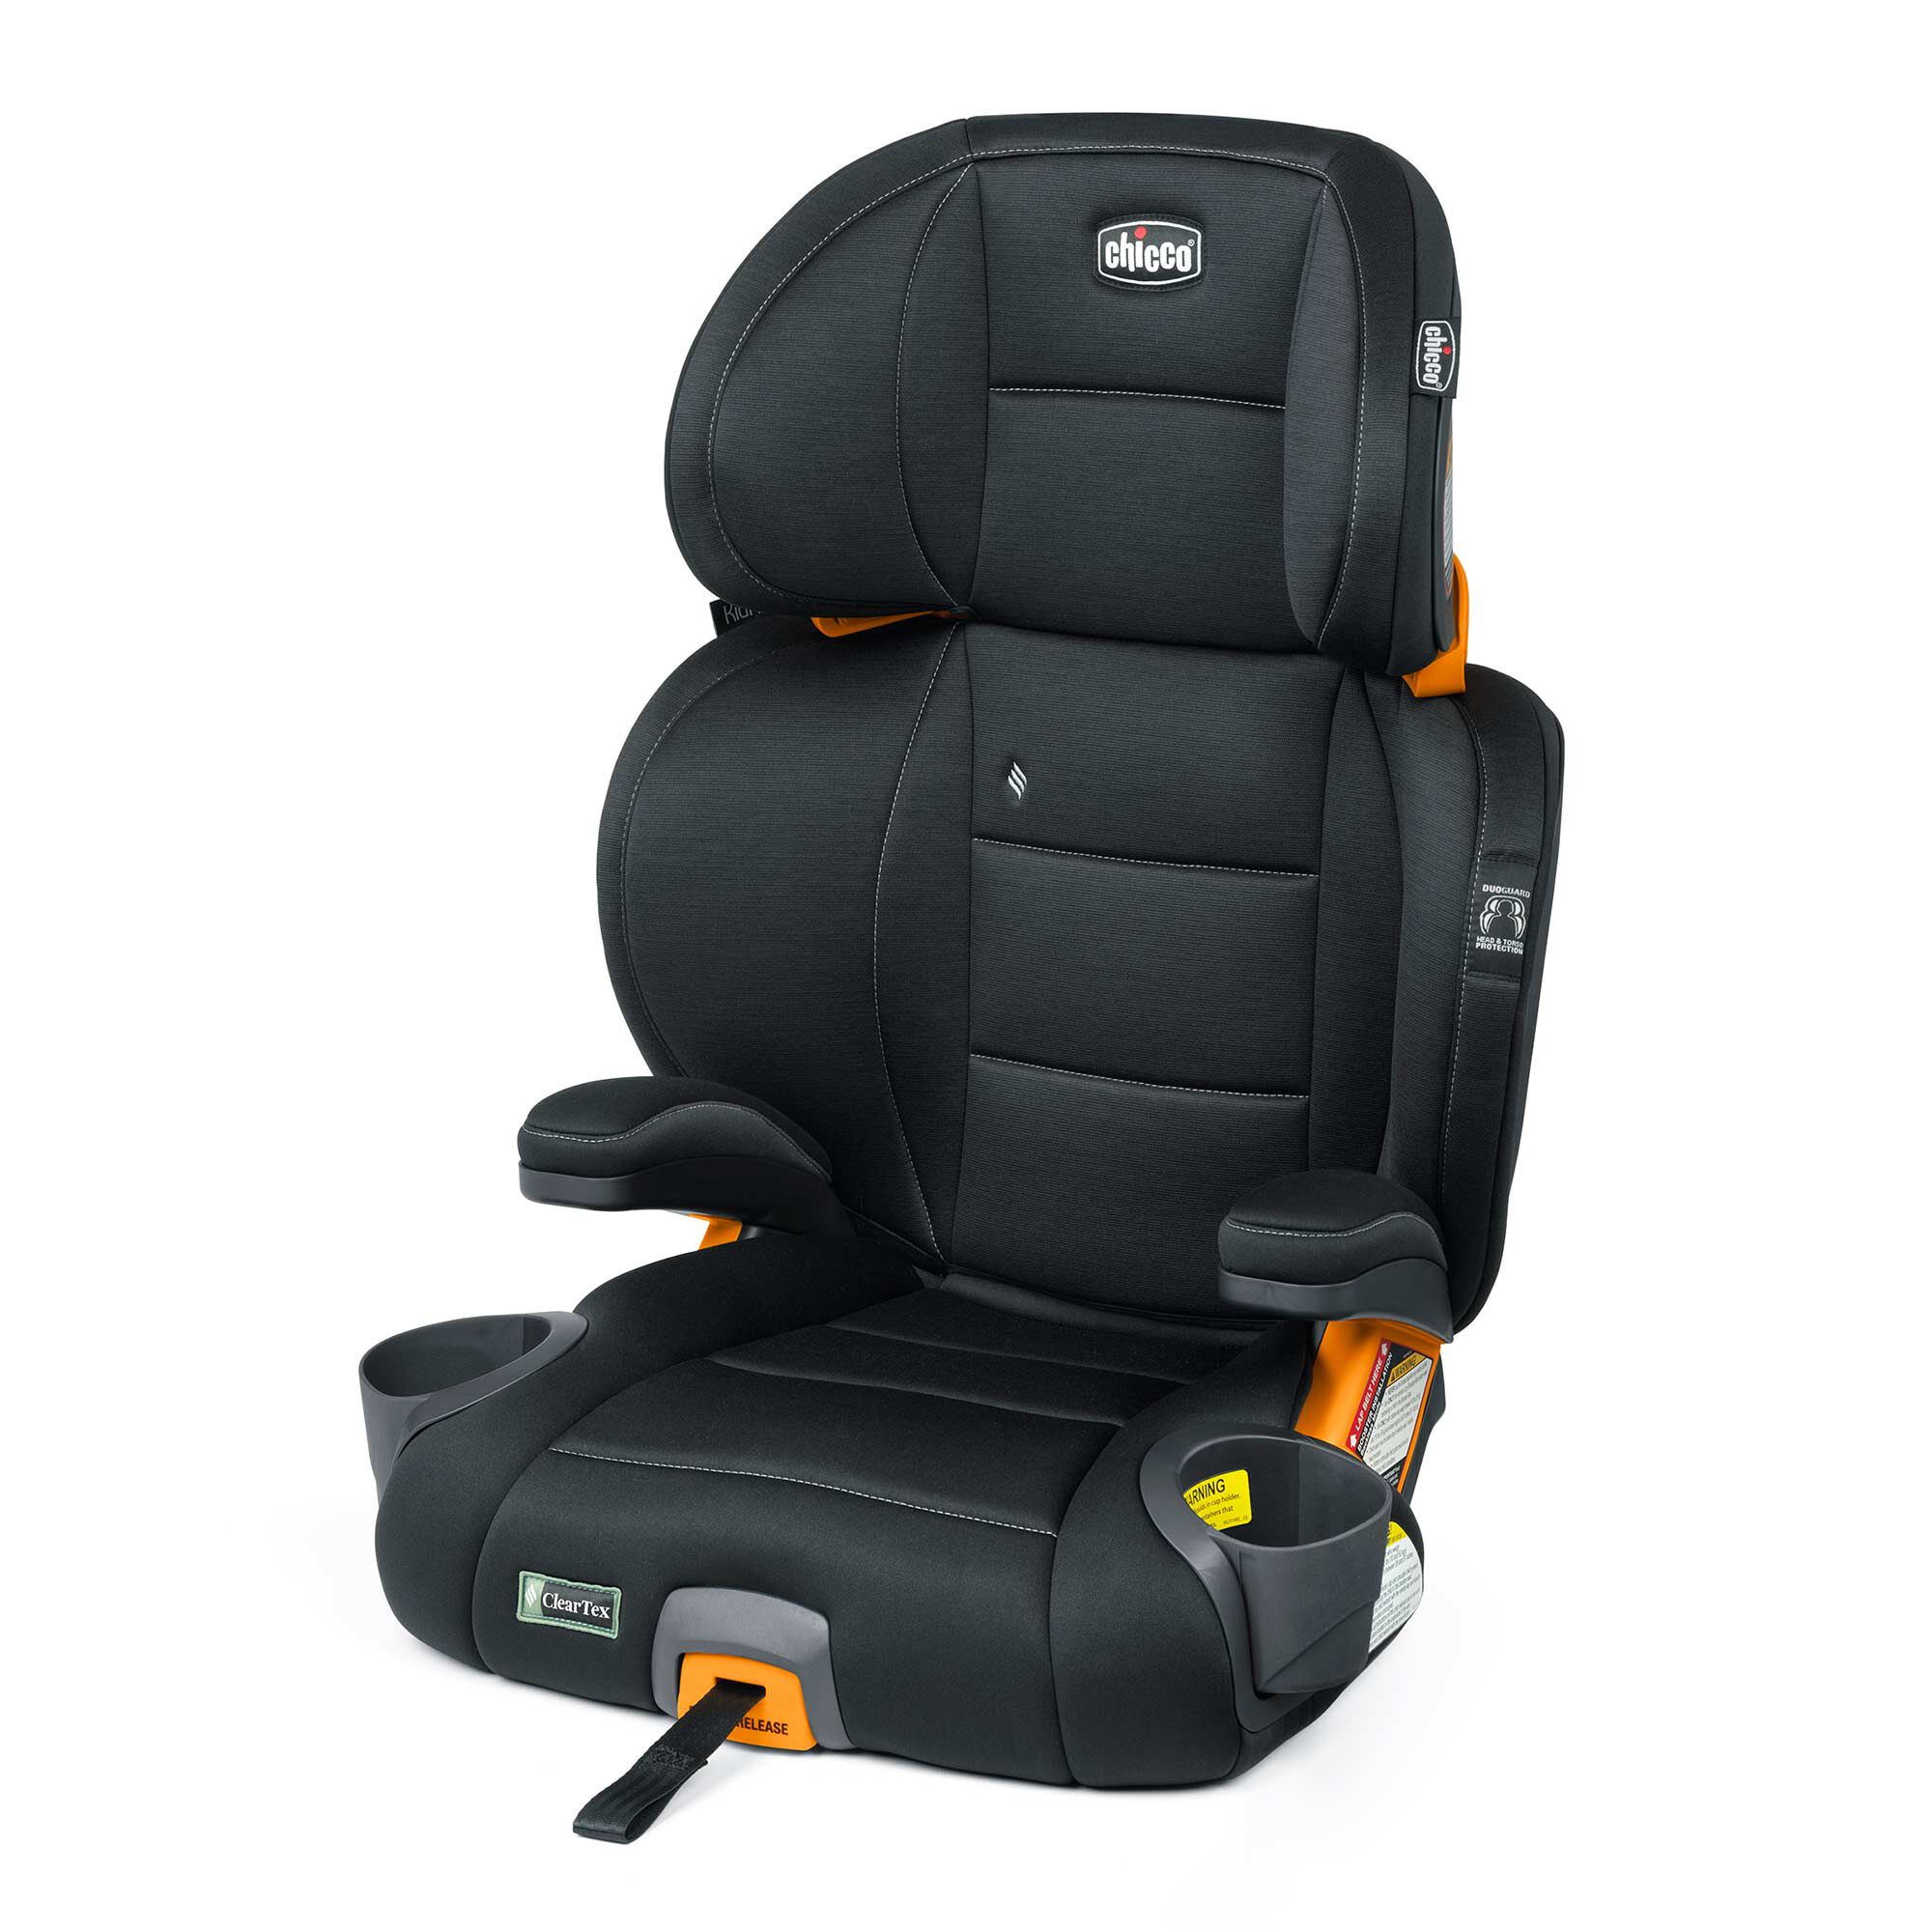 Ordelijk lading Ambient KidFit ClearTex Plus 2-in-1 Belt-Positioning Booster Car Seat - Obsidian |  Chicco